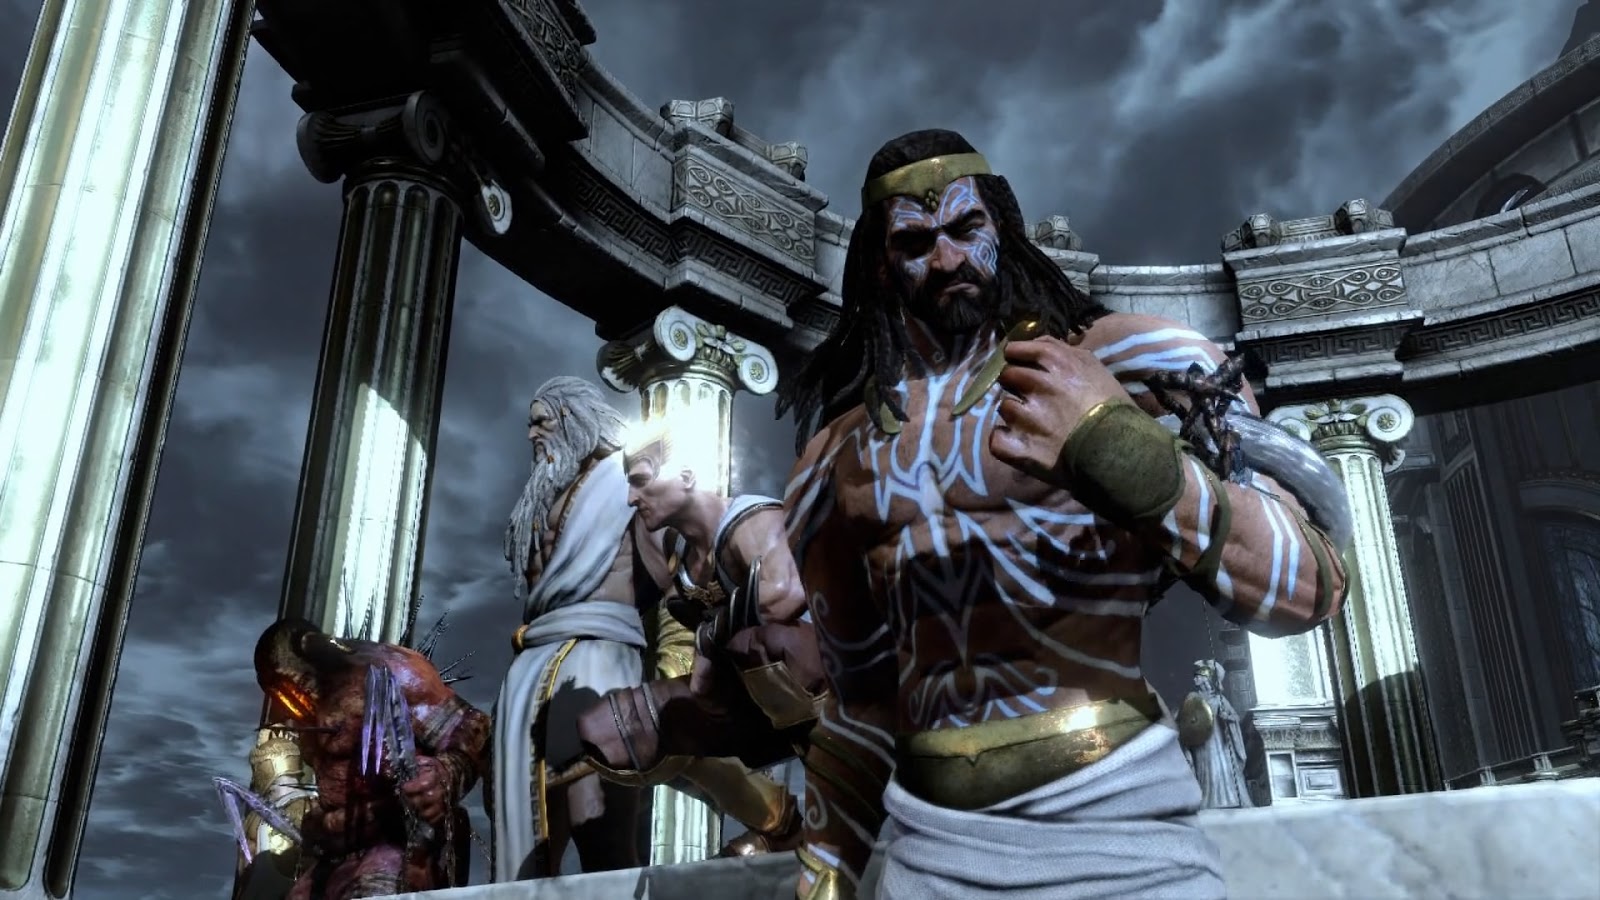 god of war 3 for pc